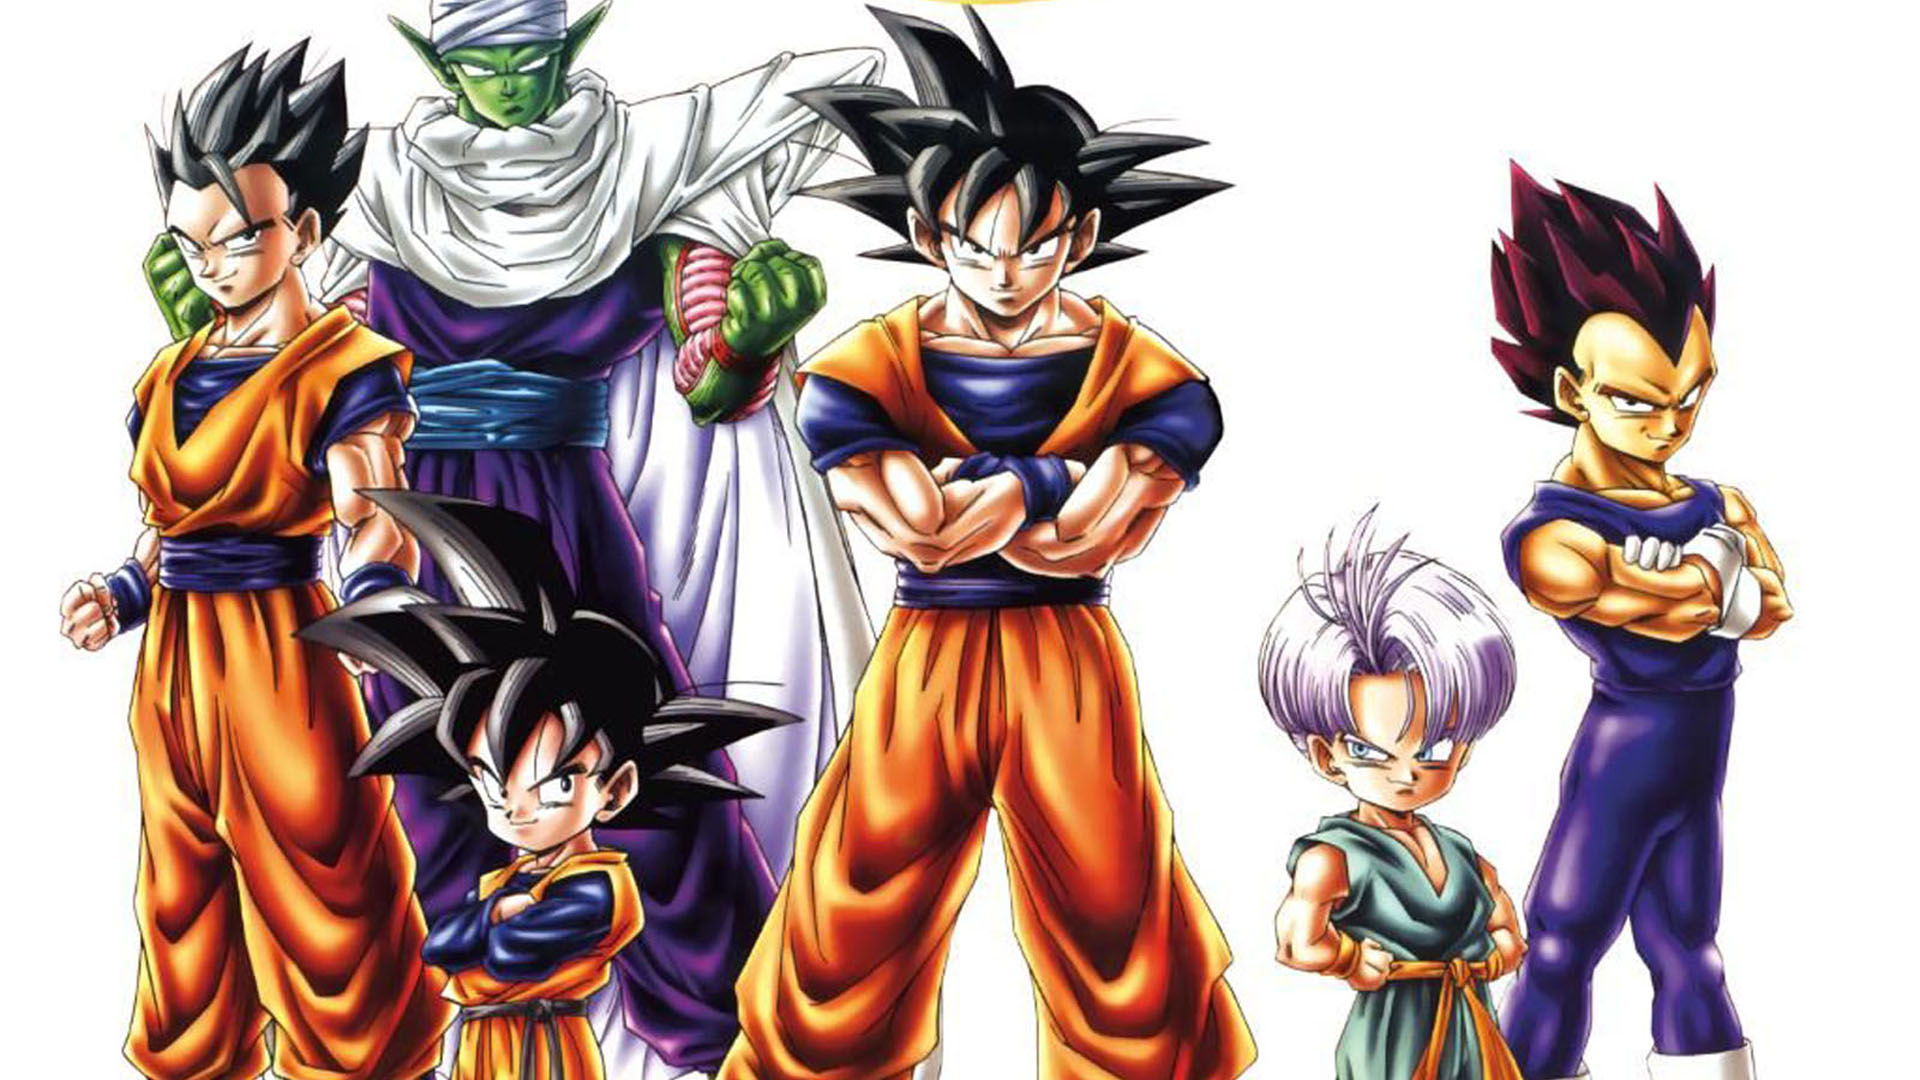 Dragon Ball Z Pictures Images, Download free Dragon Ball Z hd